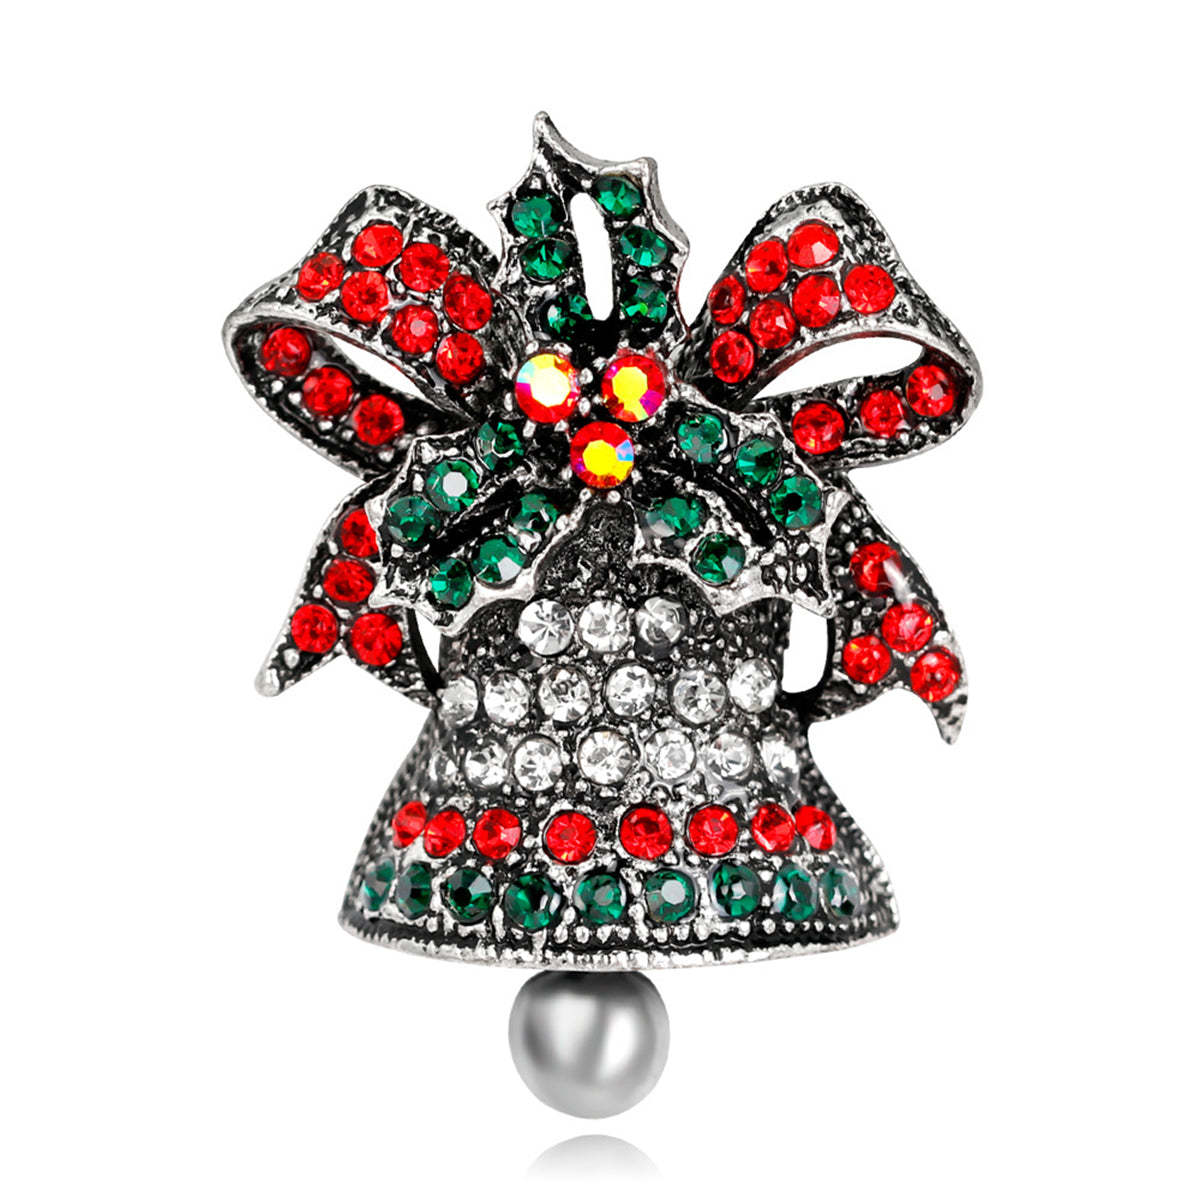 Cubic Zirconia & Silver-Plated Ringing Bell Brooch - $13.99